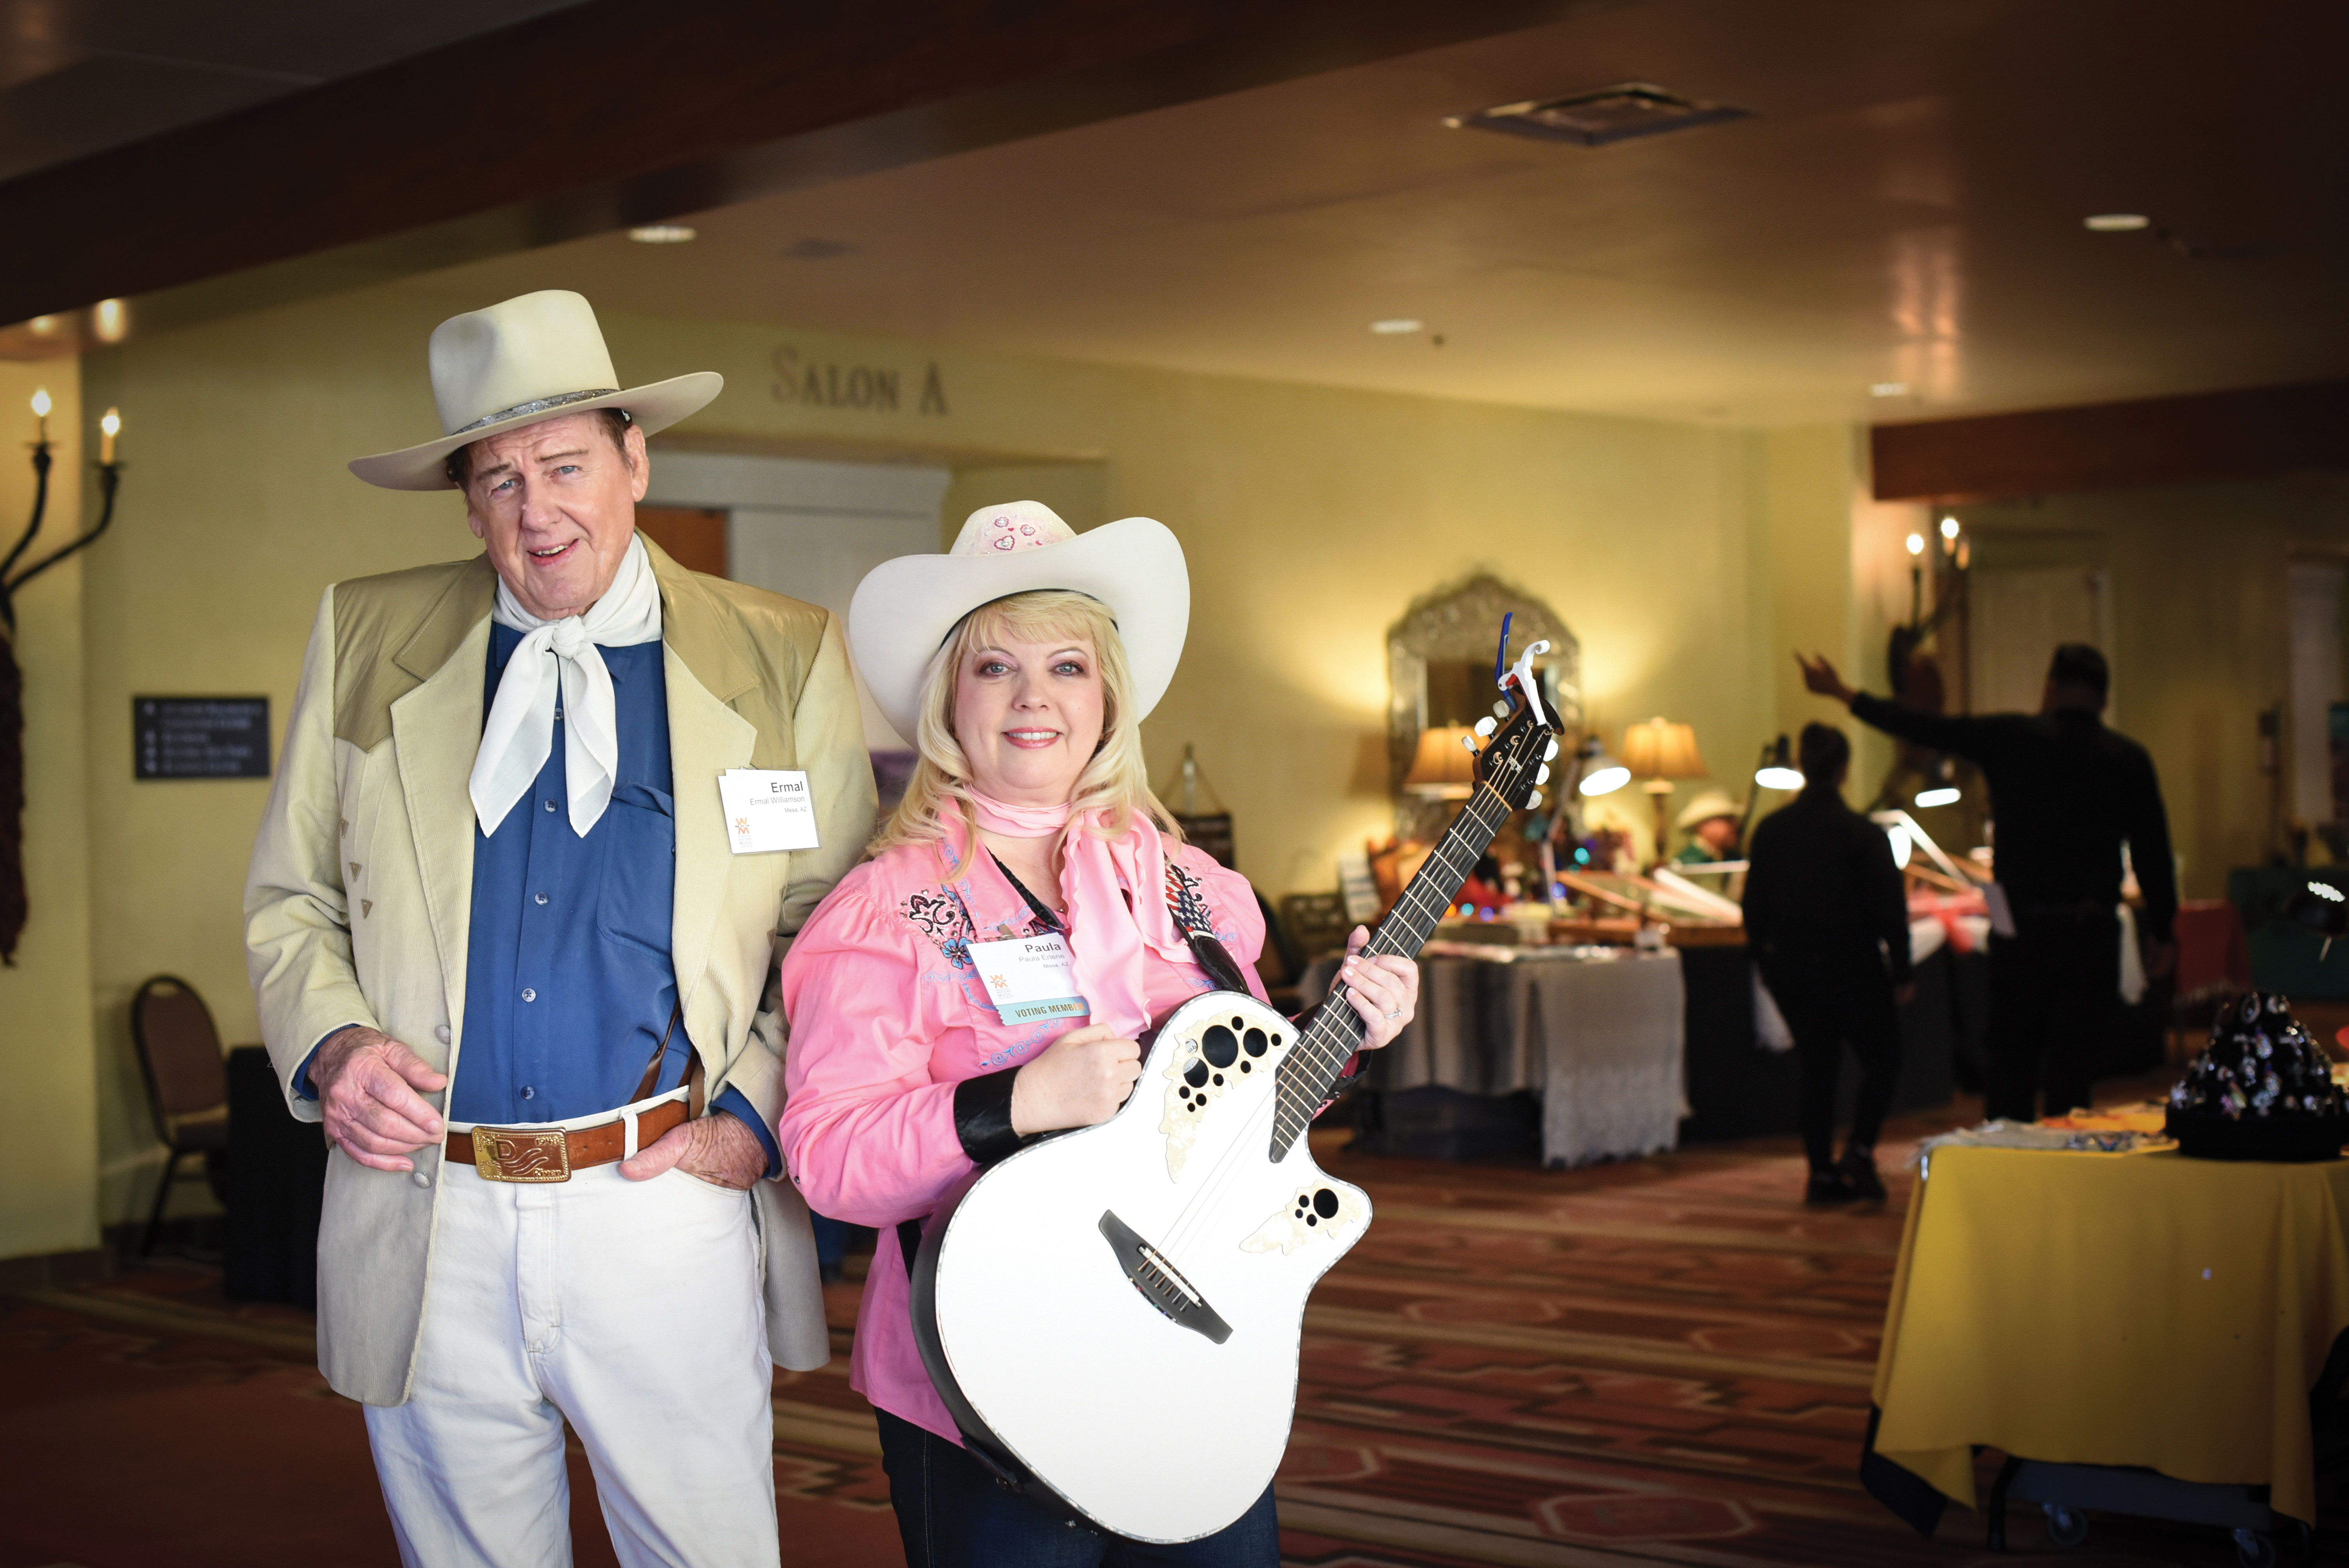 More from the International Western Music Association's 2018 gathering.